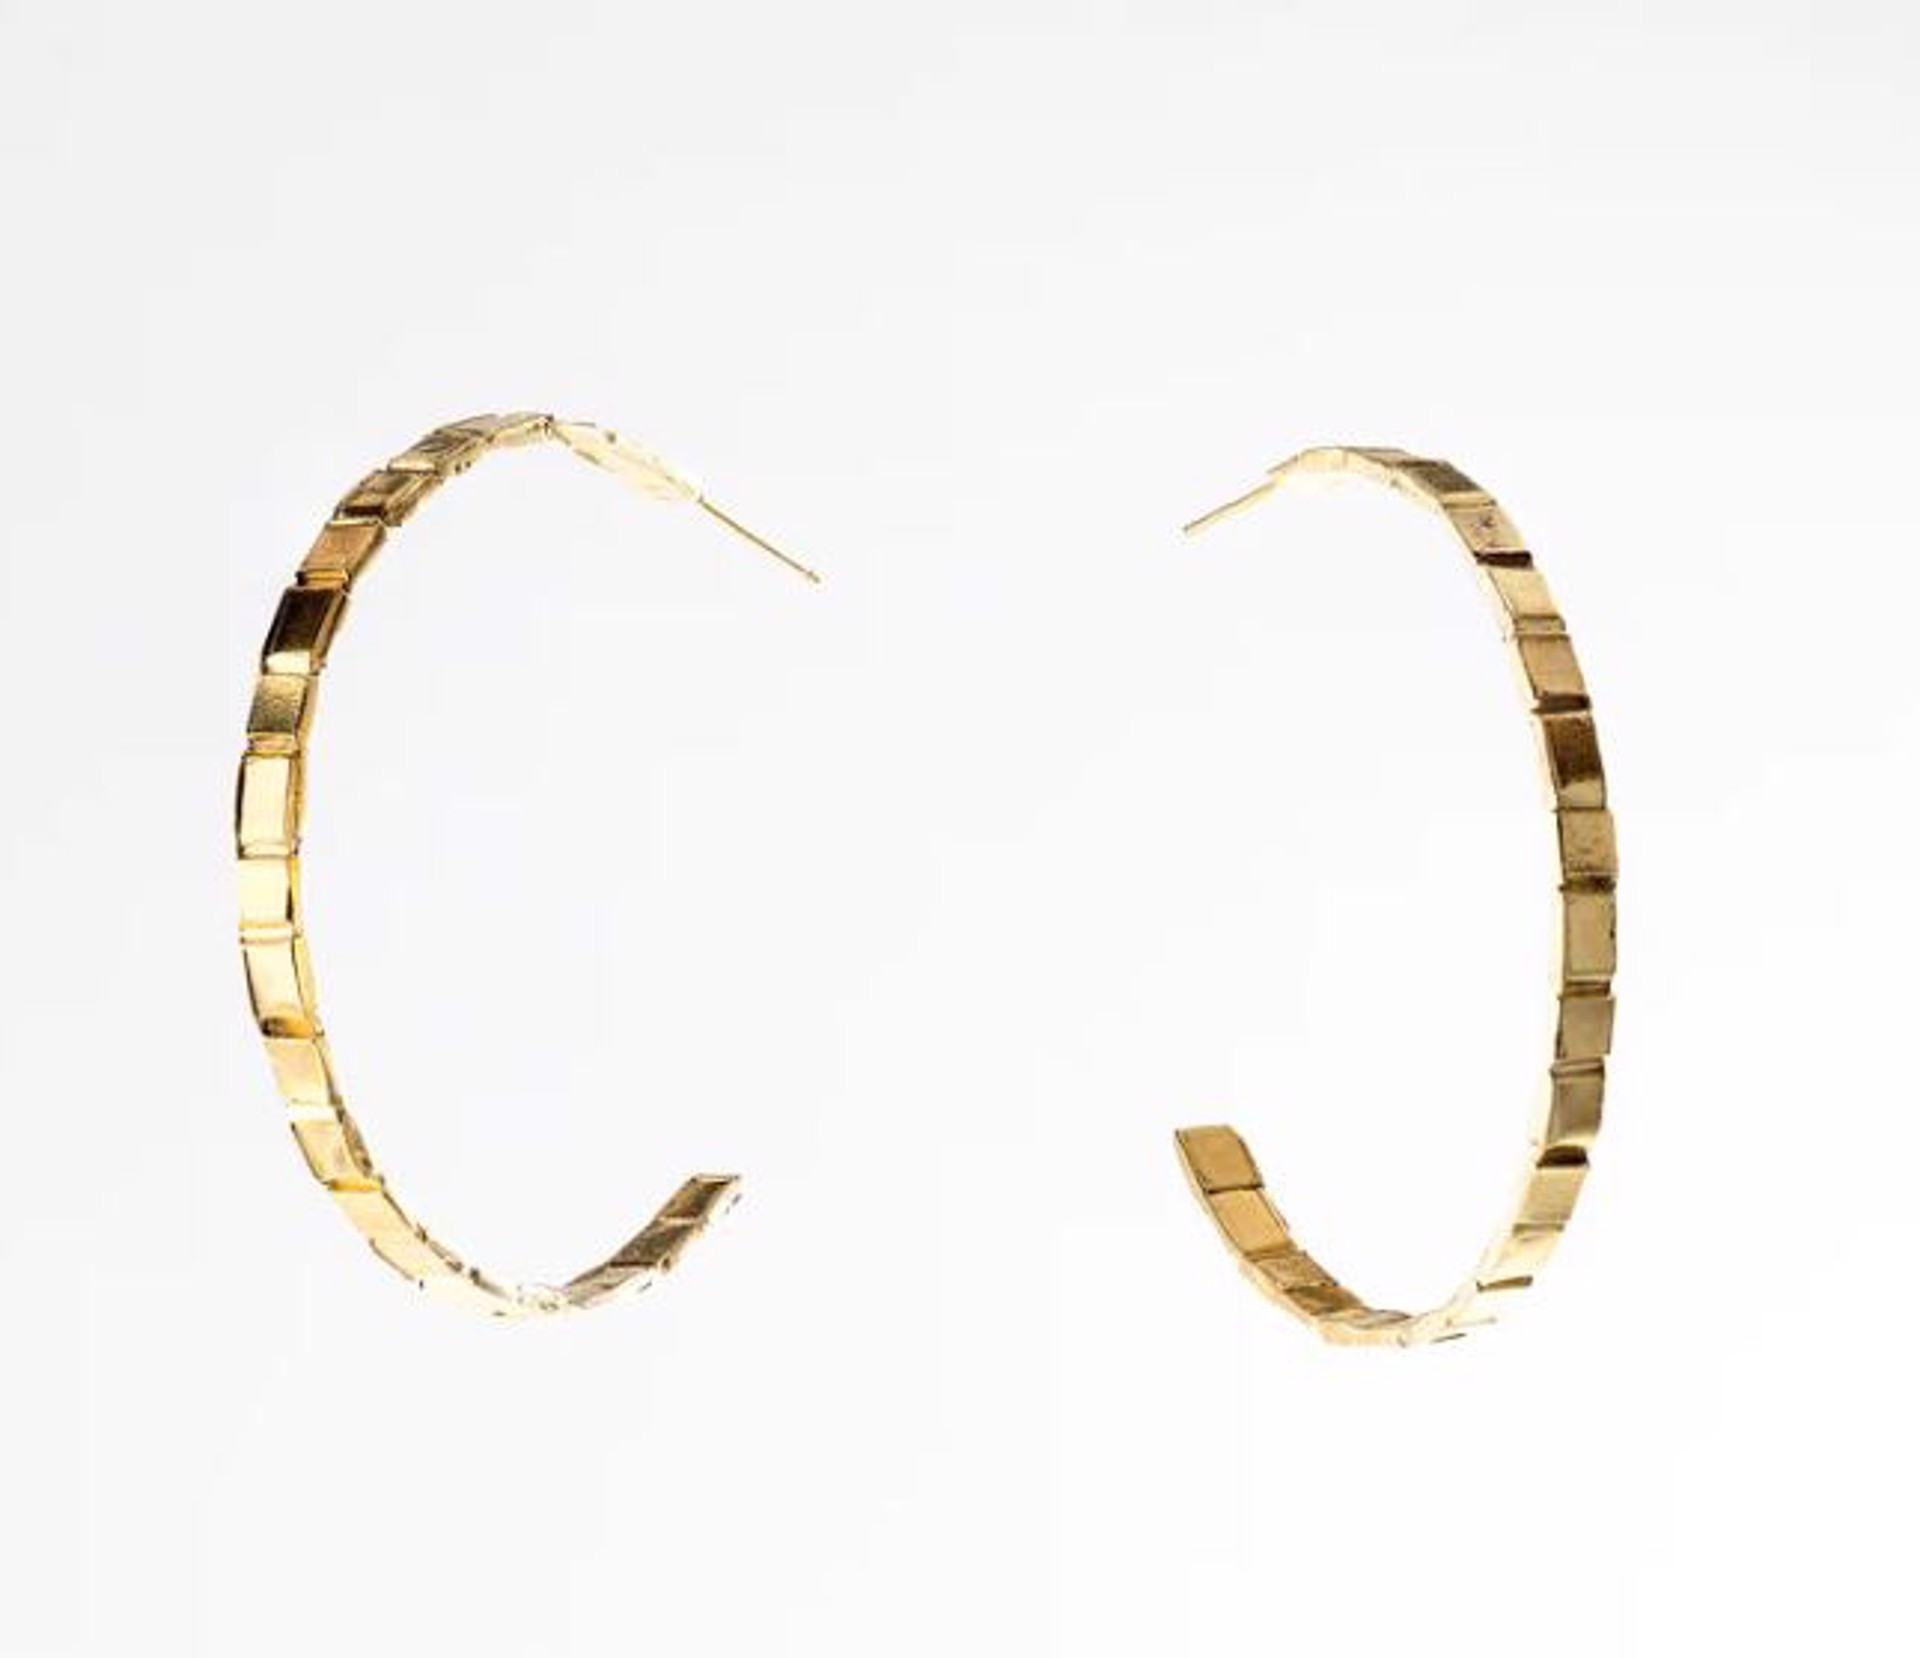 Large Single Woven Hoop Earrings - Gold Plated by Sydnie Wainland